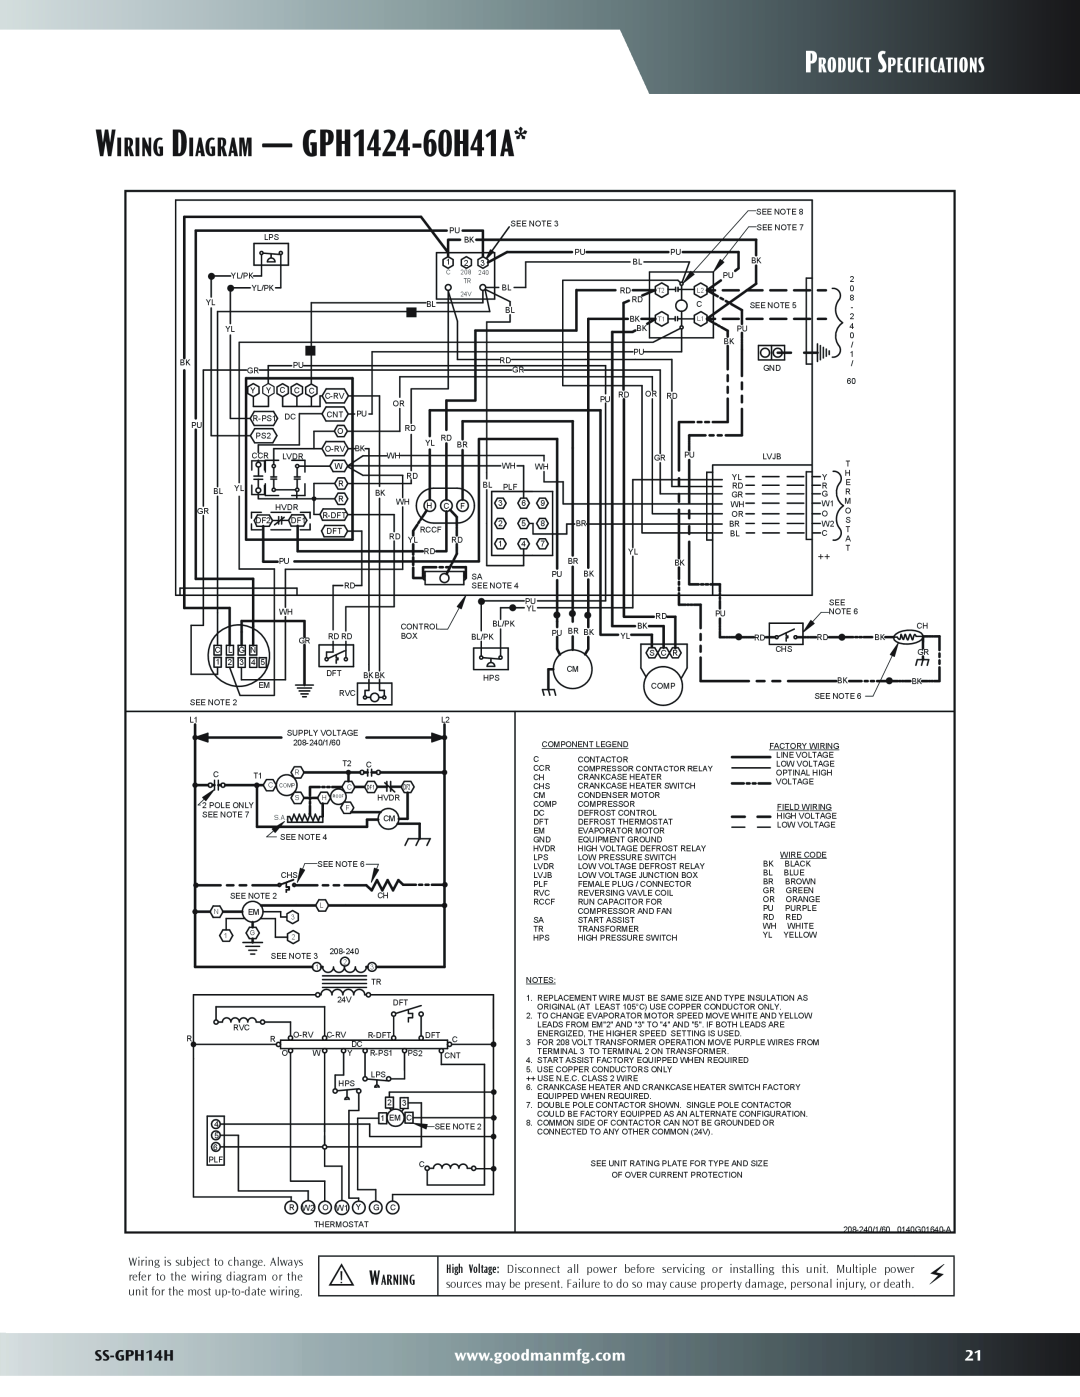 Goodman Mfg dimensions Wiring Diagram - GPH1424-60H41A, Product Specifications, SS-GPH14H 